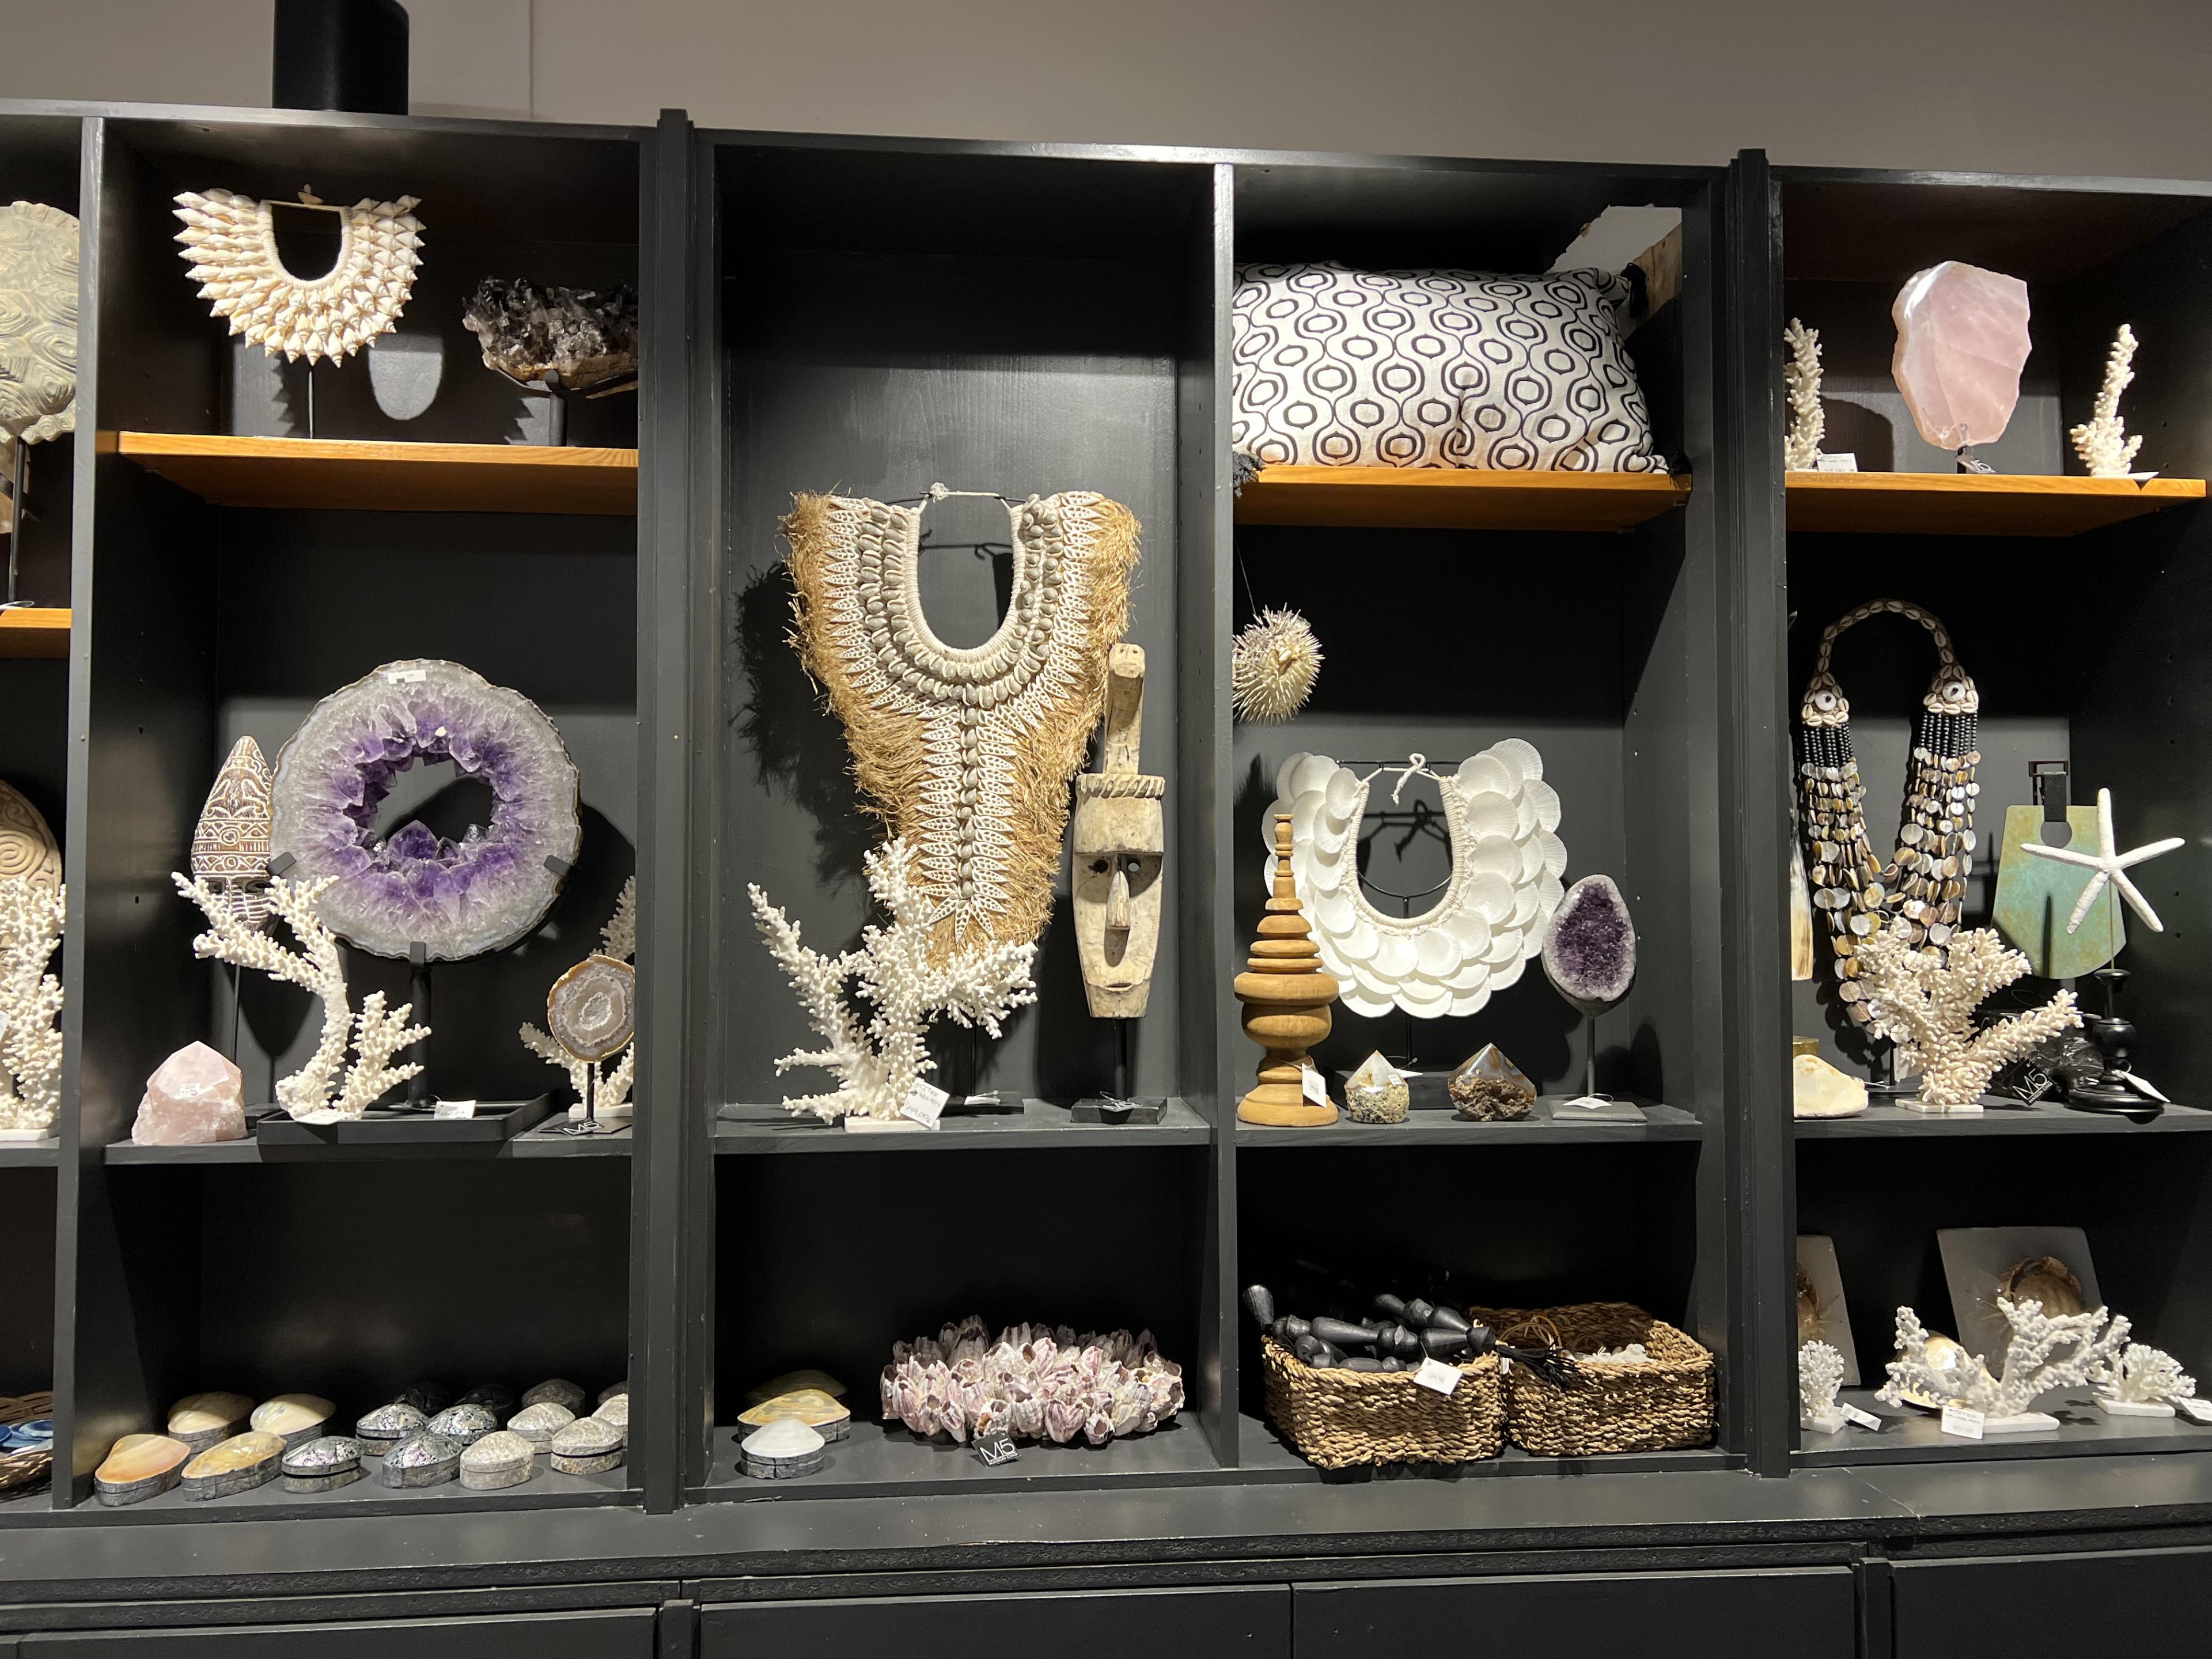 Shelves stocked with gemstones, shell necklaces and nautical decor 